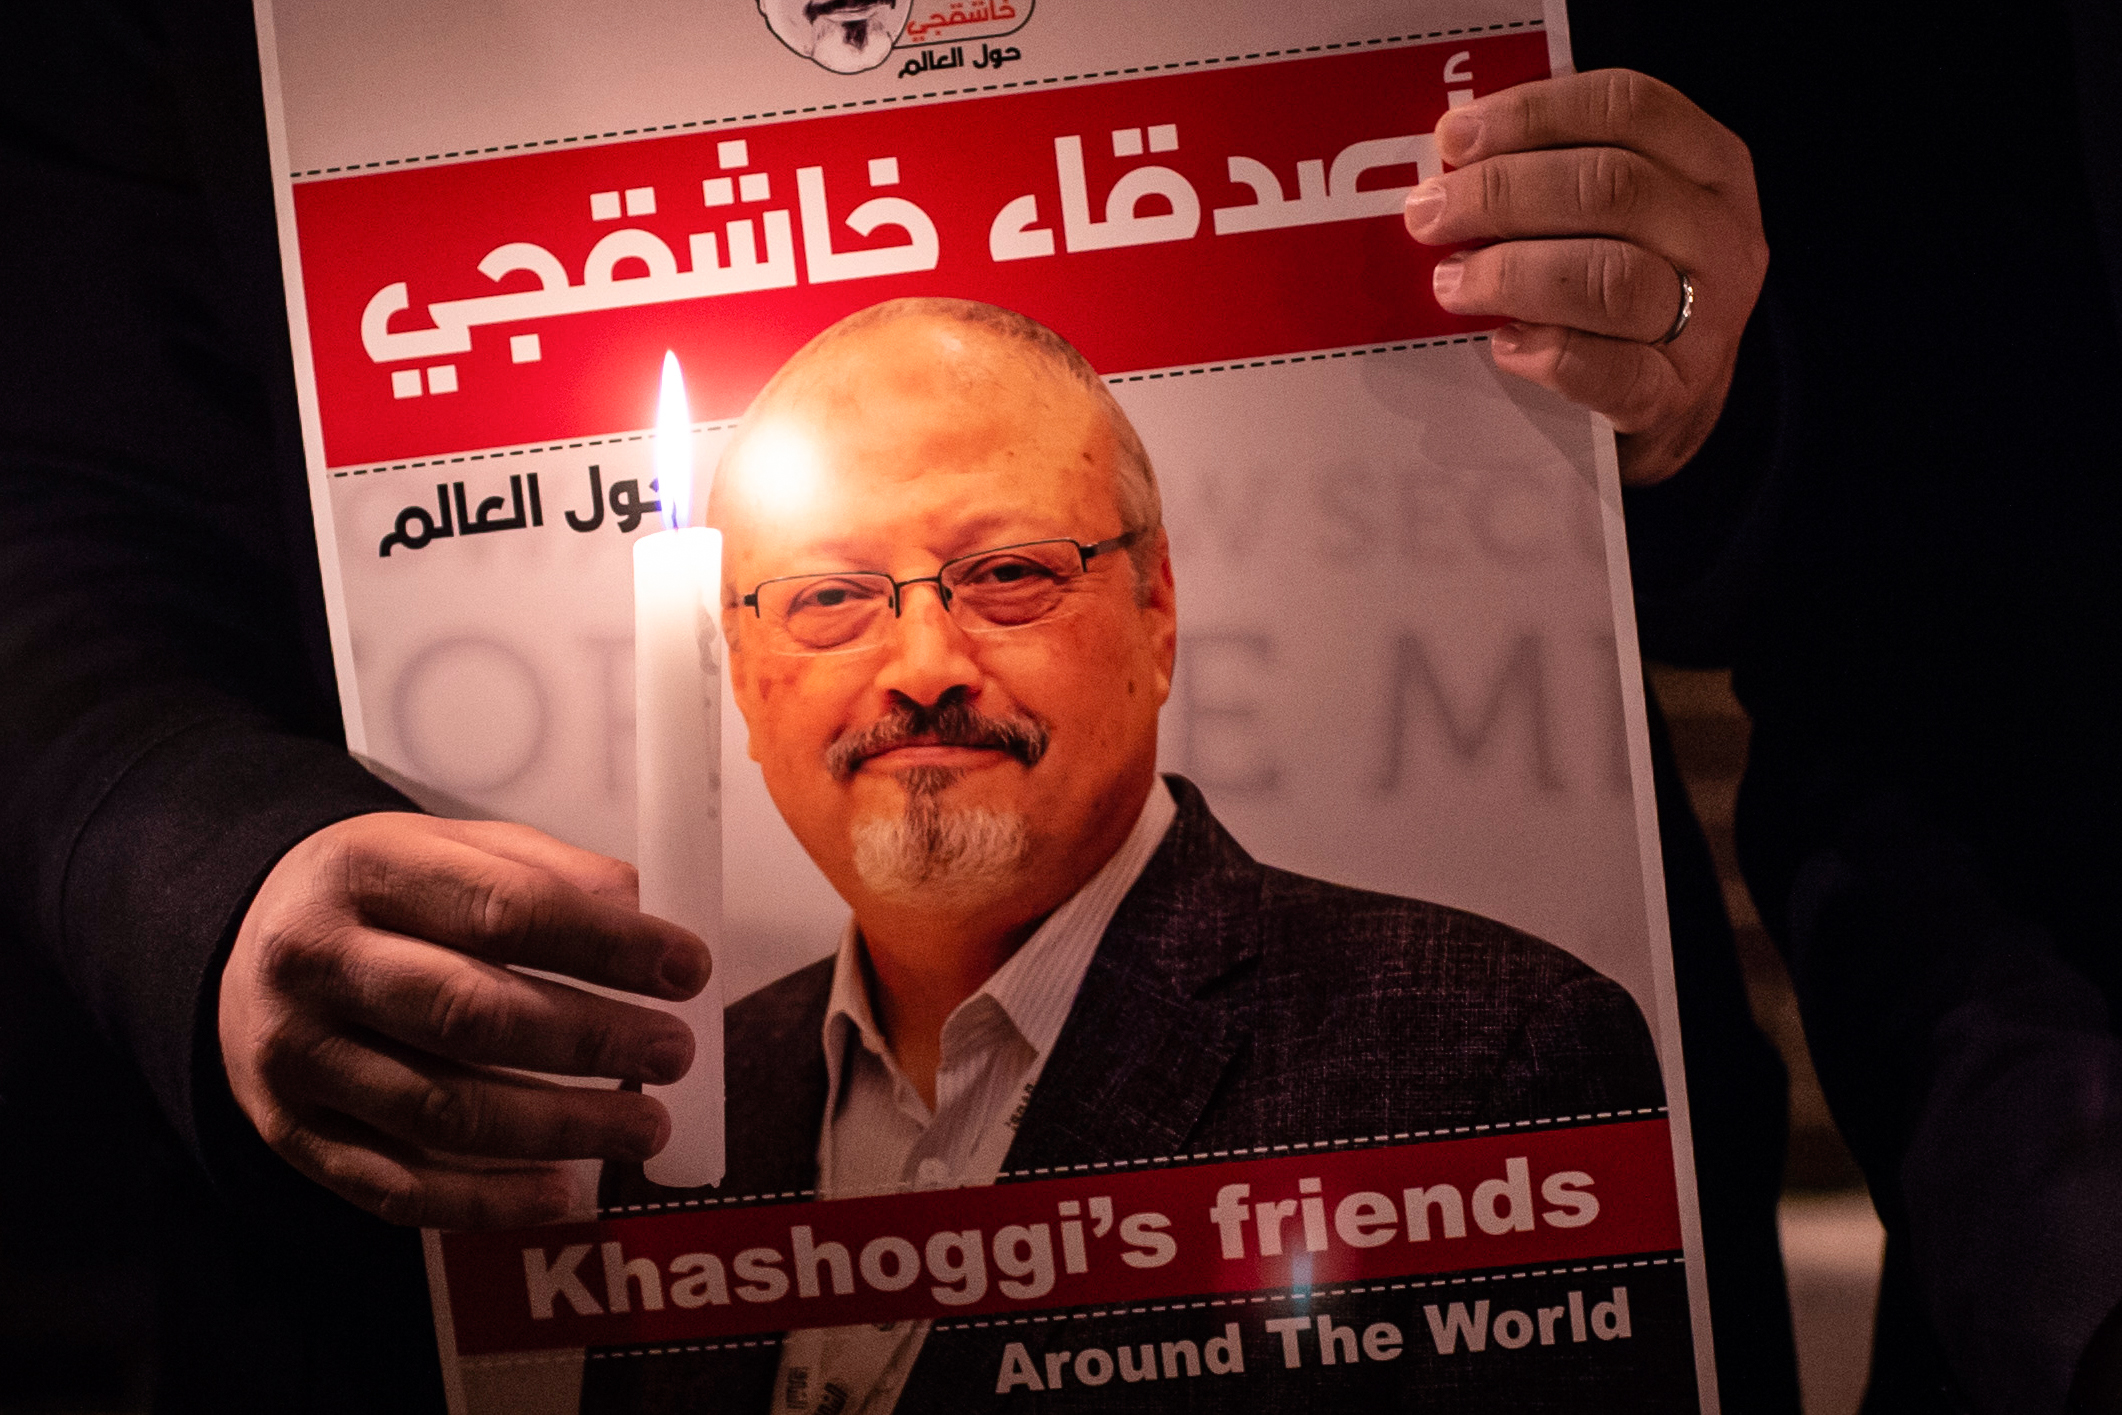 TOPSHOT - A demonstrator holds a poster picturing Saudi journalist Jamal Khashoggi and a lightened candle during a gathering outside the Saudi Arabia consulate in Istanbul, on October 25, 2018. - Jamal Khashoggi, a Washington Post contributor, was killed on October 2, 2018 after a visit to the Saudi consulate in Istanbul to obtain paperwork before marrying his Turkish fiancee. (Photo by Yasin AKGUL / AFP)        (Photo credit should read YASIN AKGUL/AFP/Getty Images) (Yasin Akgul— AFP/Getty Images)